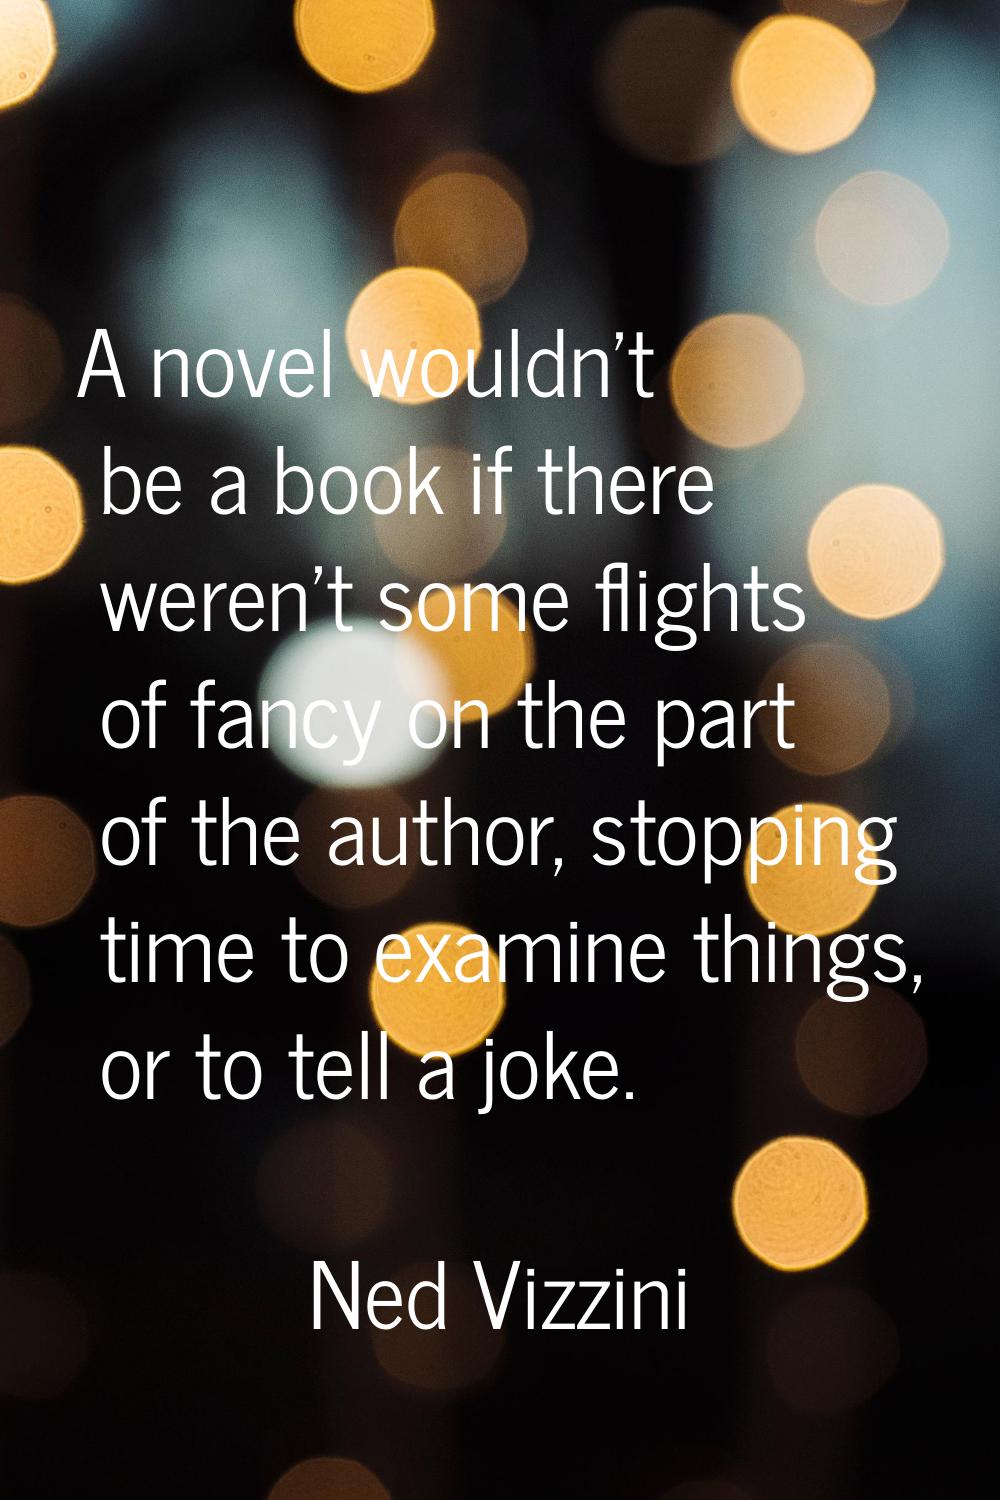 A novel wouldn't be a book if there weren't some flights of fancy on the part of the author, stoppi